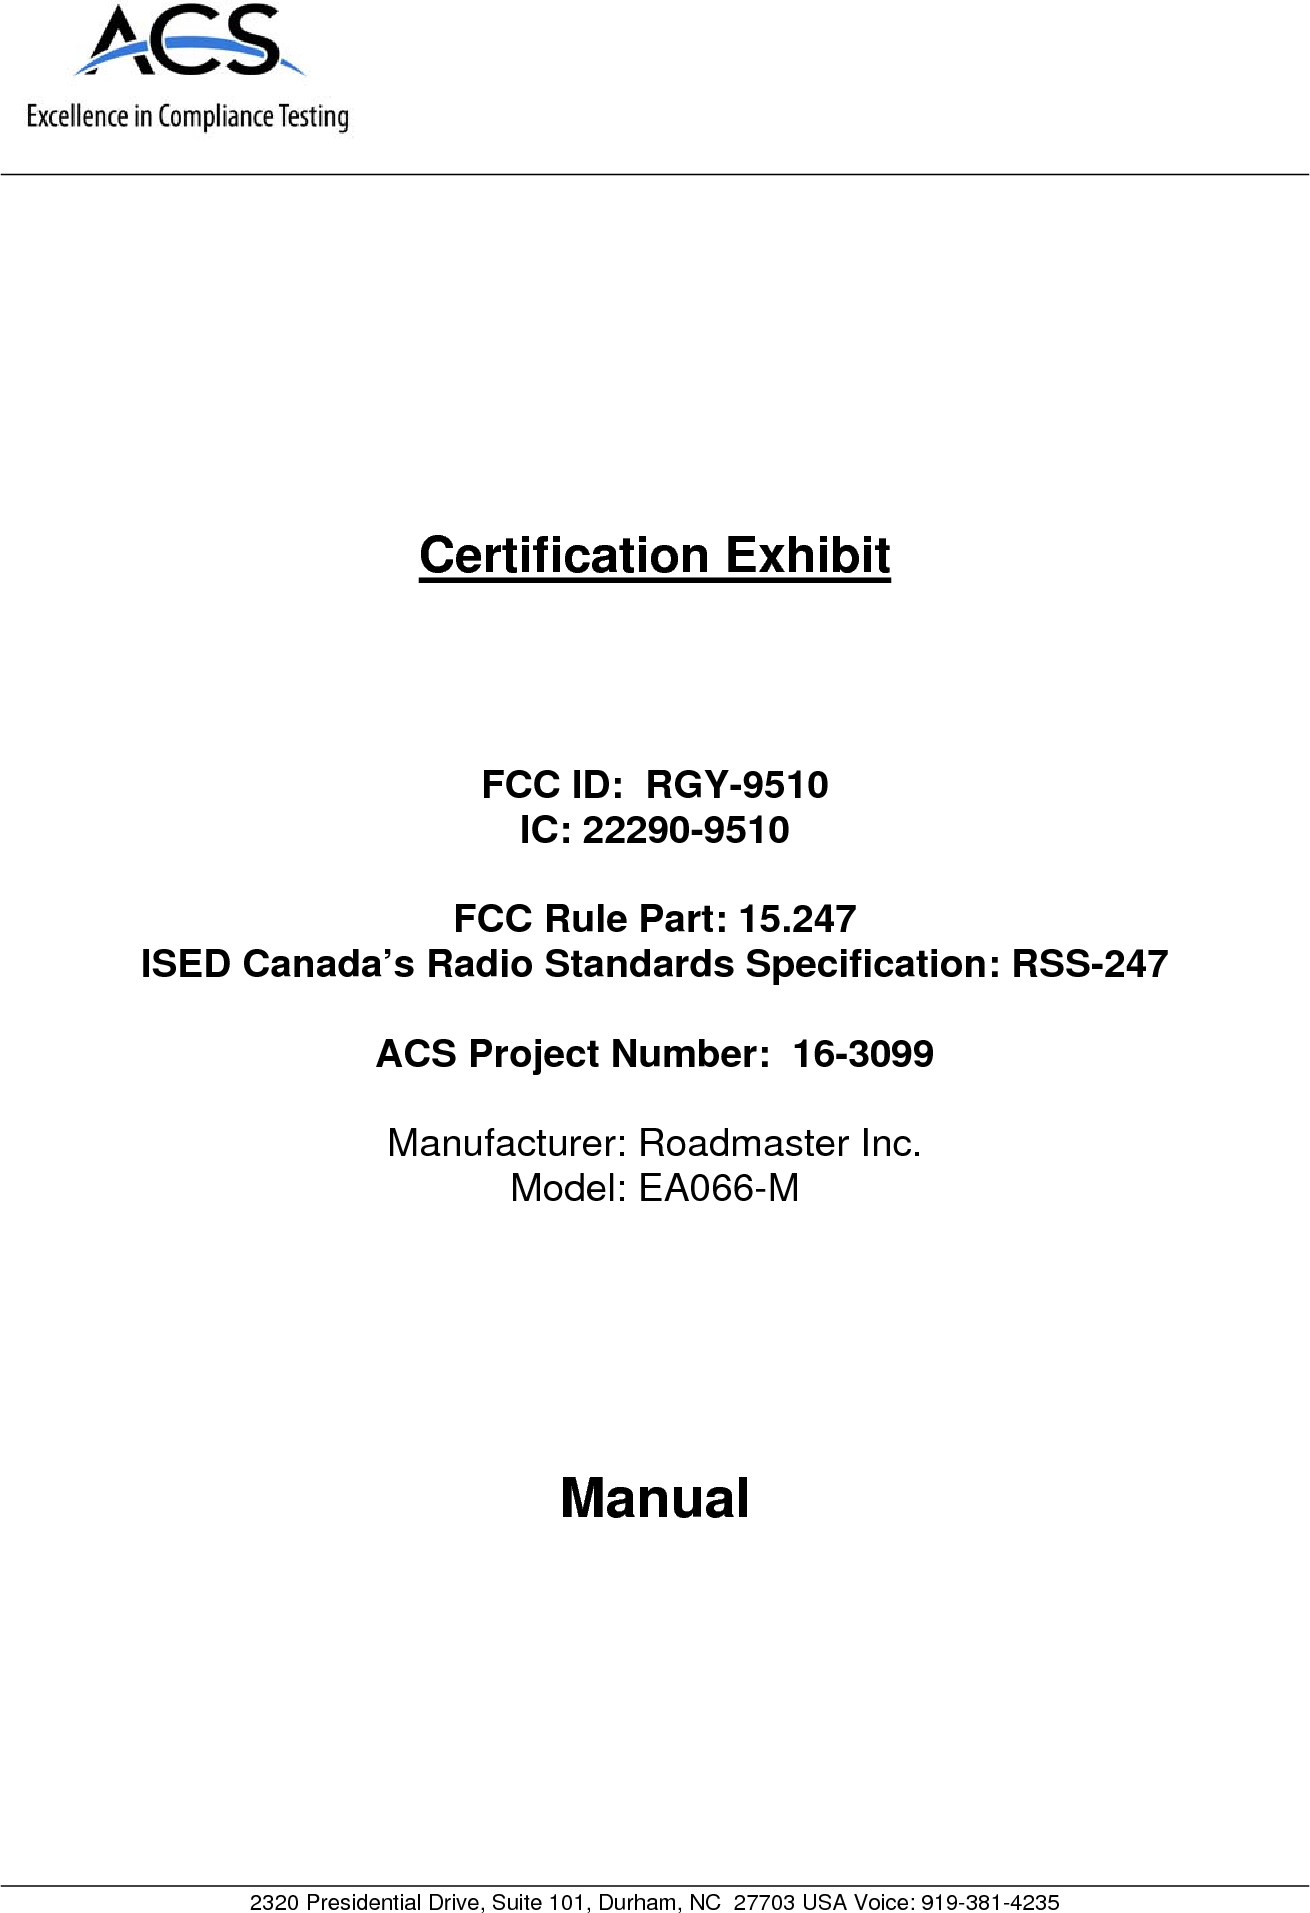     2320 Presidential Drive, Suite 101, Durham, NC  27703 USA Voice: 919-381-4235     Certification Exhibit     FCC ID:  RGY-9510 IC: 22290-9510  FCC Rule Part: 15.247 ISED Canada’s Radio Standards Specification: RSS-247  ACS Project Number:  16-3099   Manufacturer: Roadmaster Inc. Model: EA066-M     Manual  